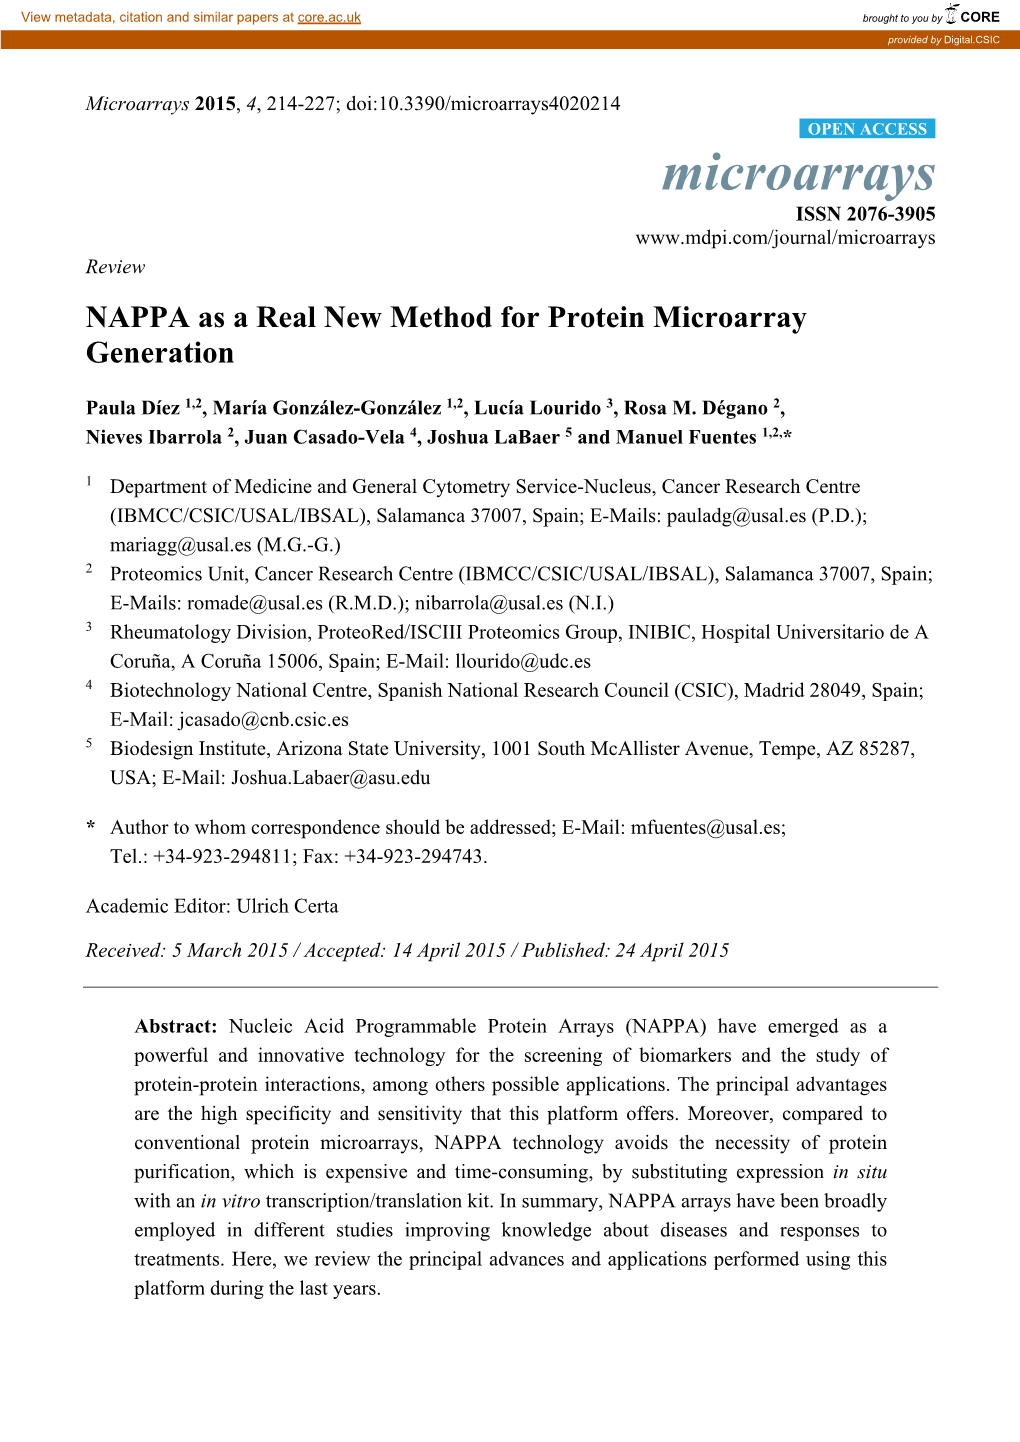 NAPPA As a Real New Method for Protein Microarray Generation